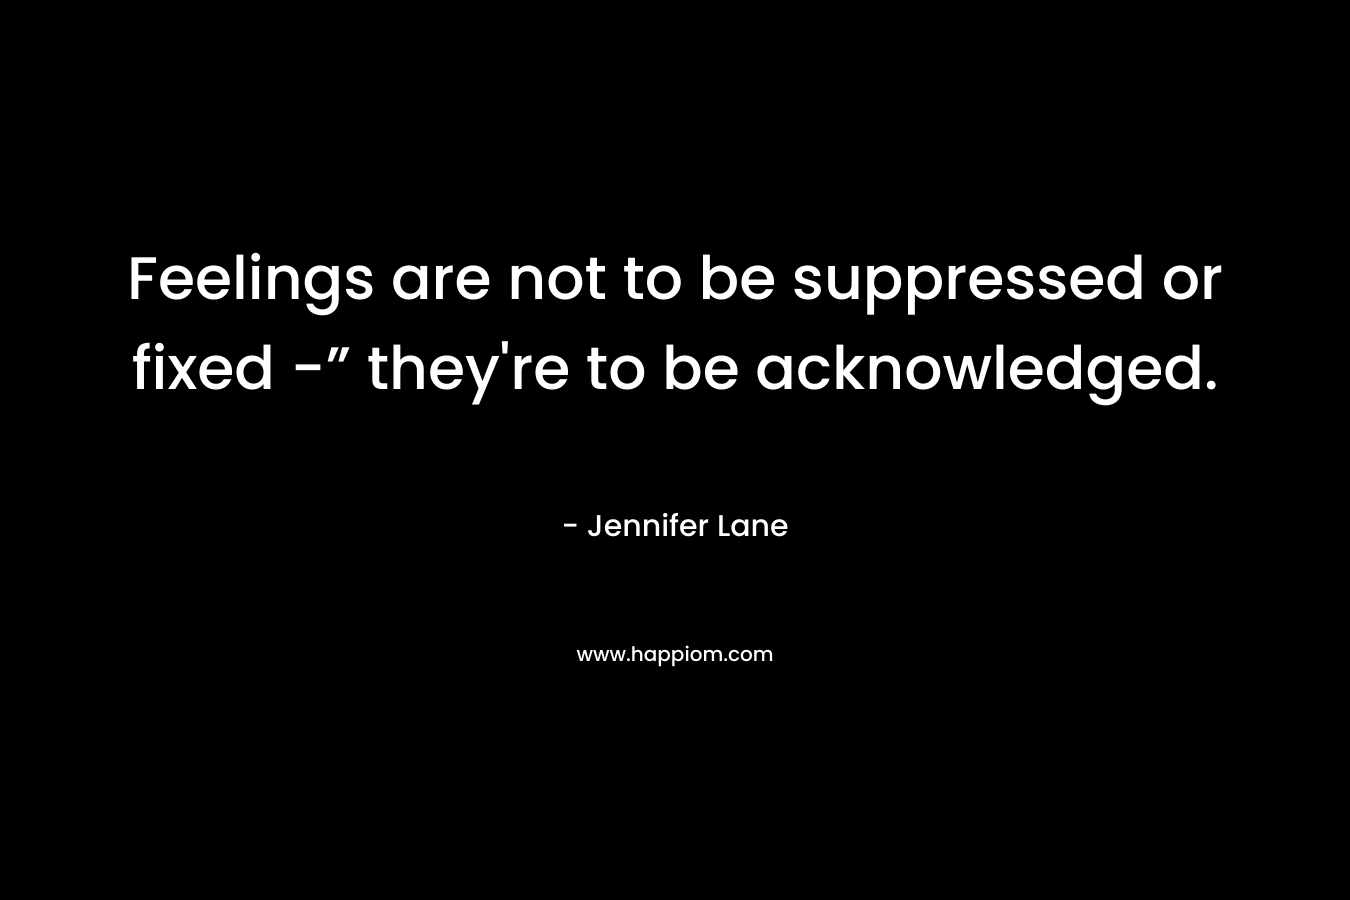 Feelings are not to be suppressed or fixed -” they’re to be acknowledged. – Jennifer Lane